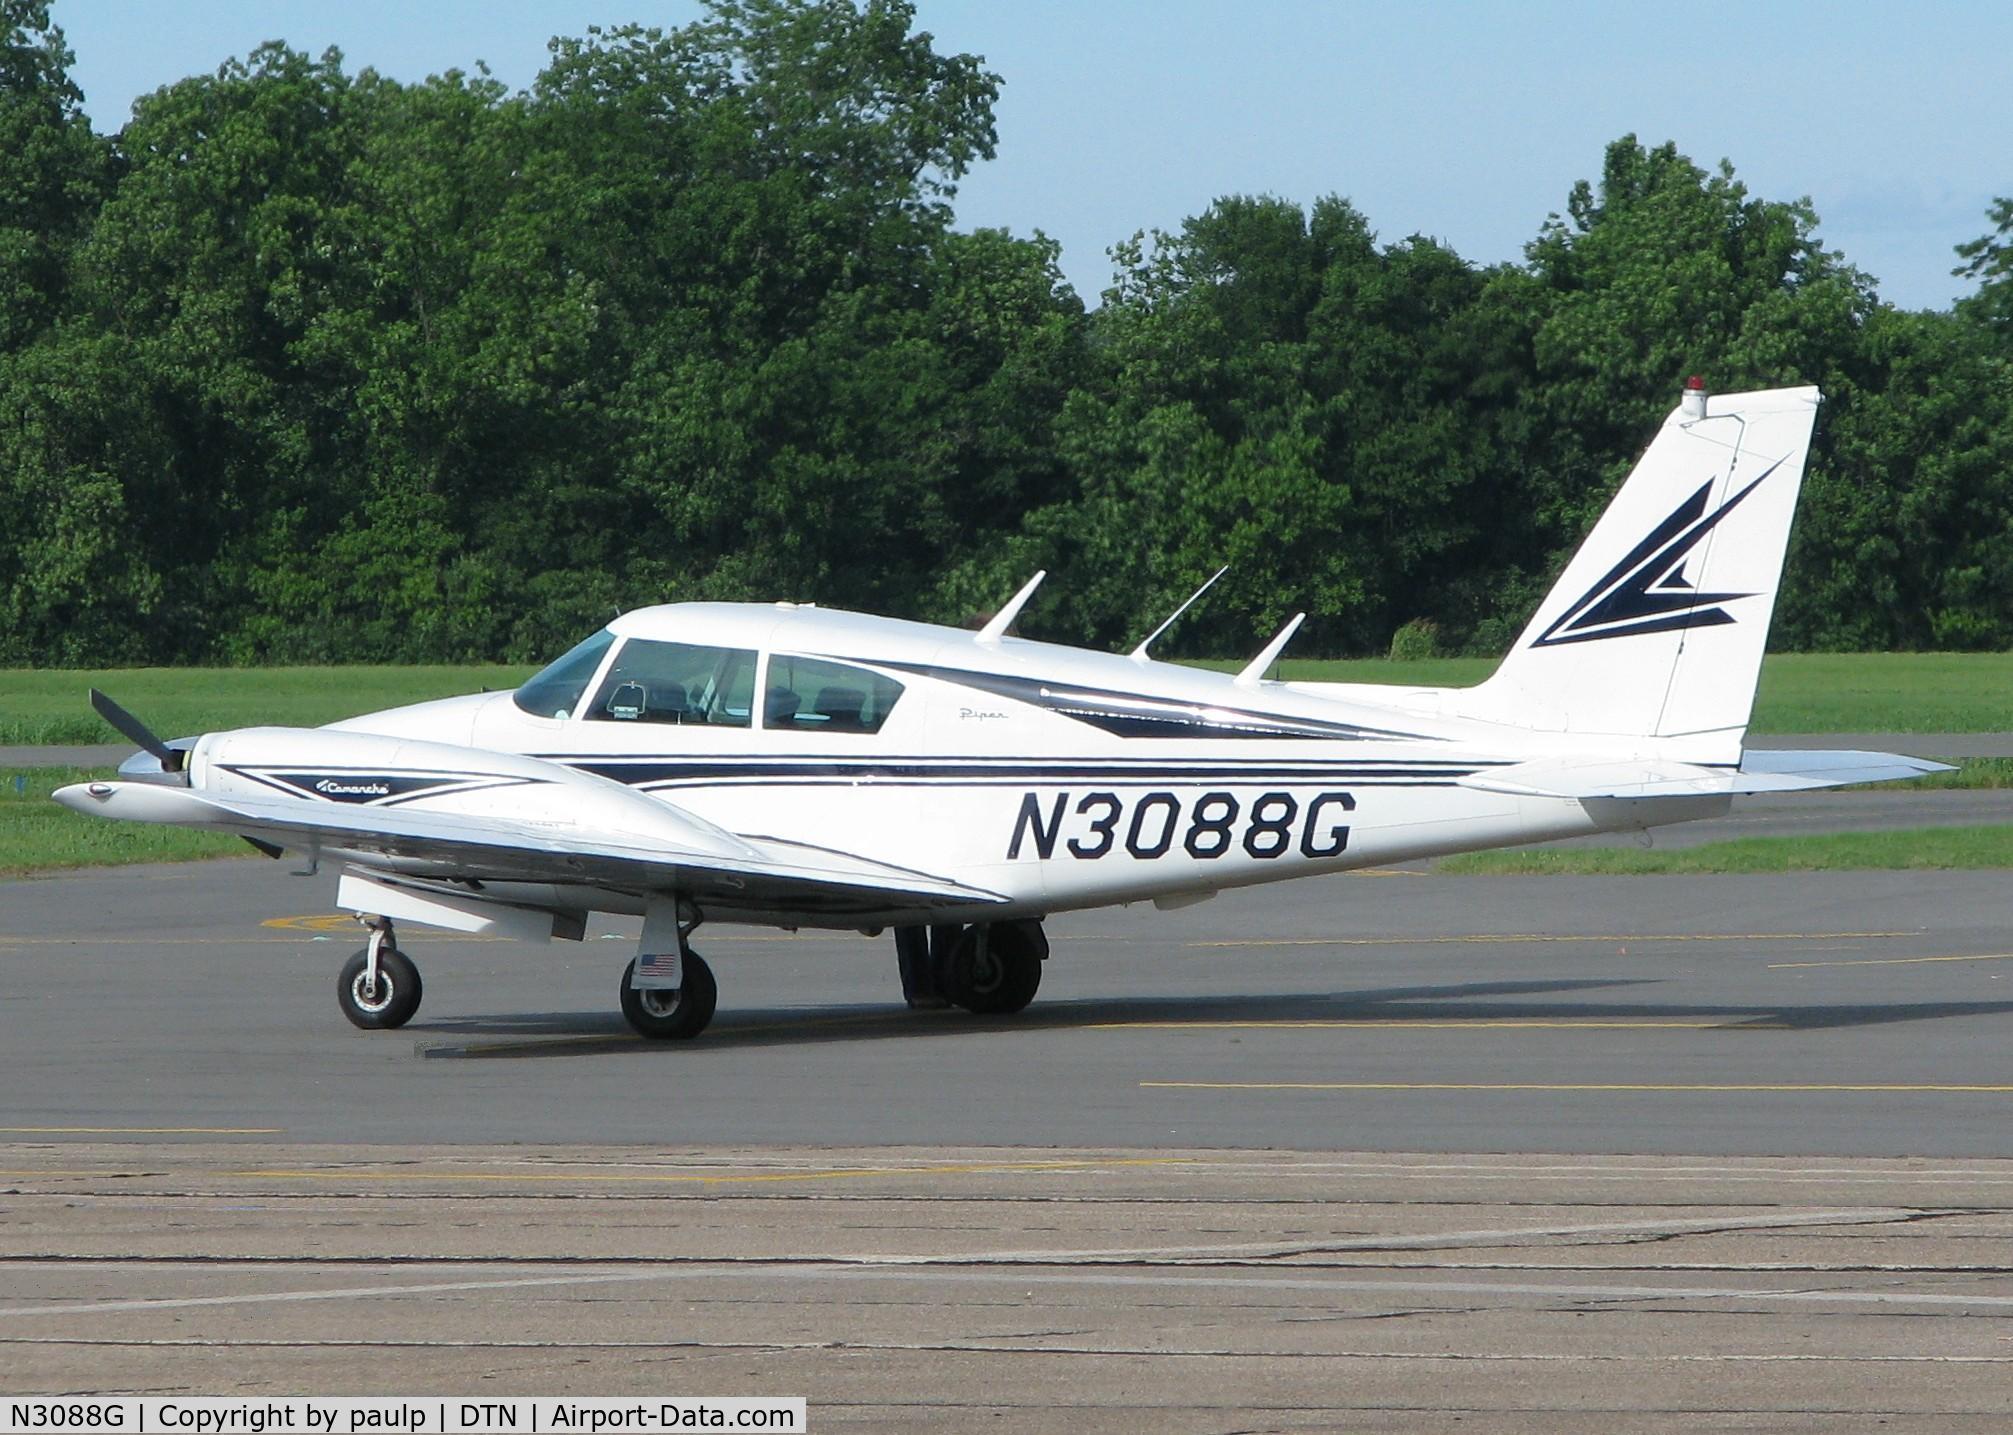 N3088G, 1963 Piper PA-30 Twin Comanche C/N 30-88, At the Shreveport Downtown airport.